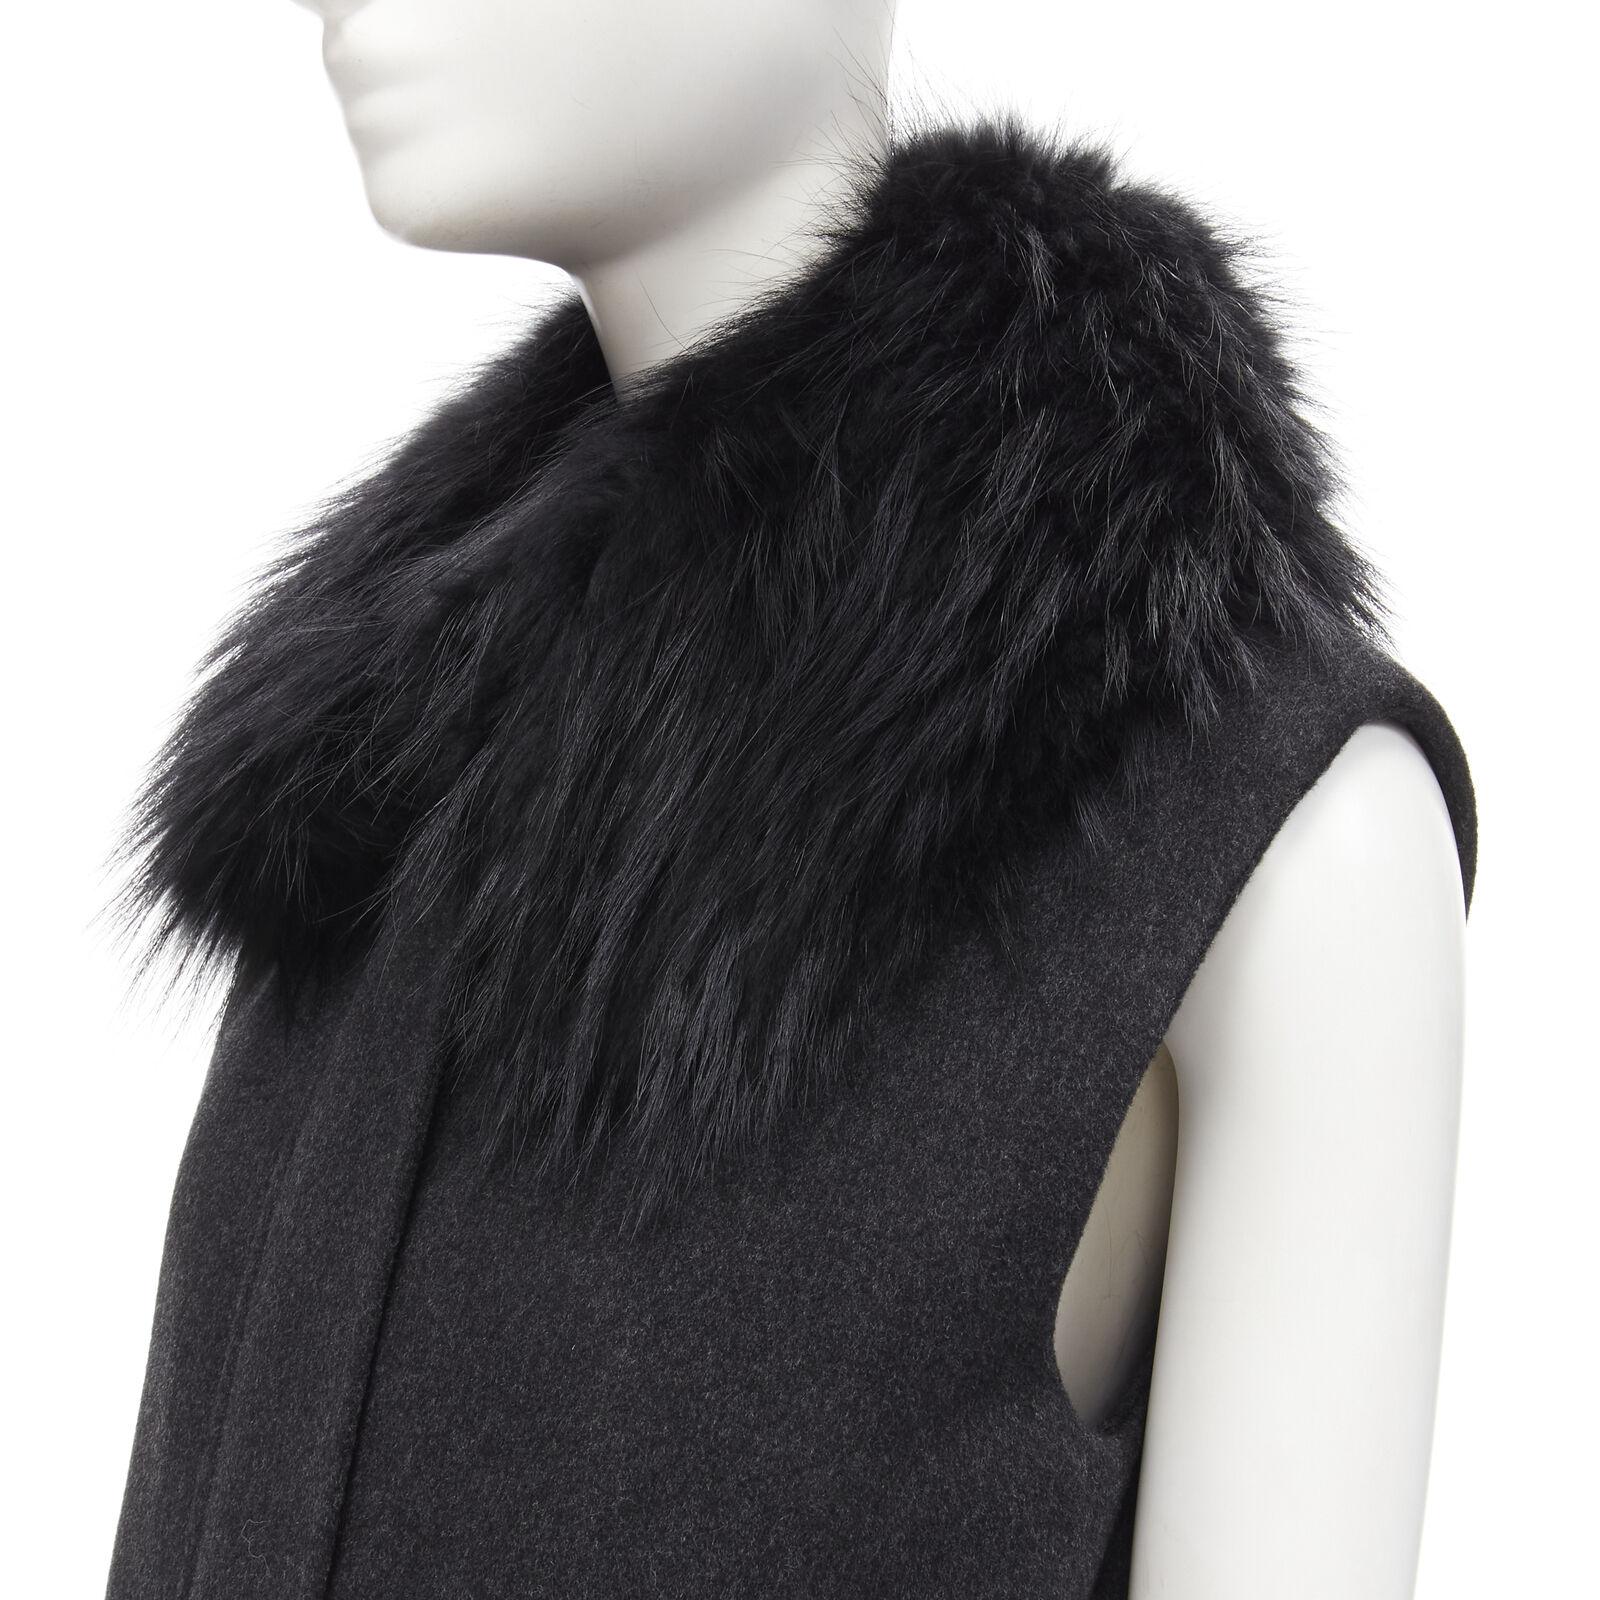 JOSEPH wool black minimal oversized fur collar flap pockets boxy vest FR38 S
Reference: LNKO/A02041
Brand: Joseph
Material: 100% Wool, Fur
Color: Black
Pattern: Solid
Closure: Zip
Lining: Fabric
Extra Details: Dual patch front pockets. Boxy